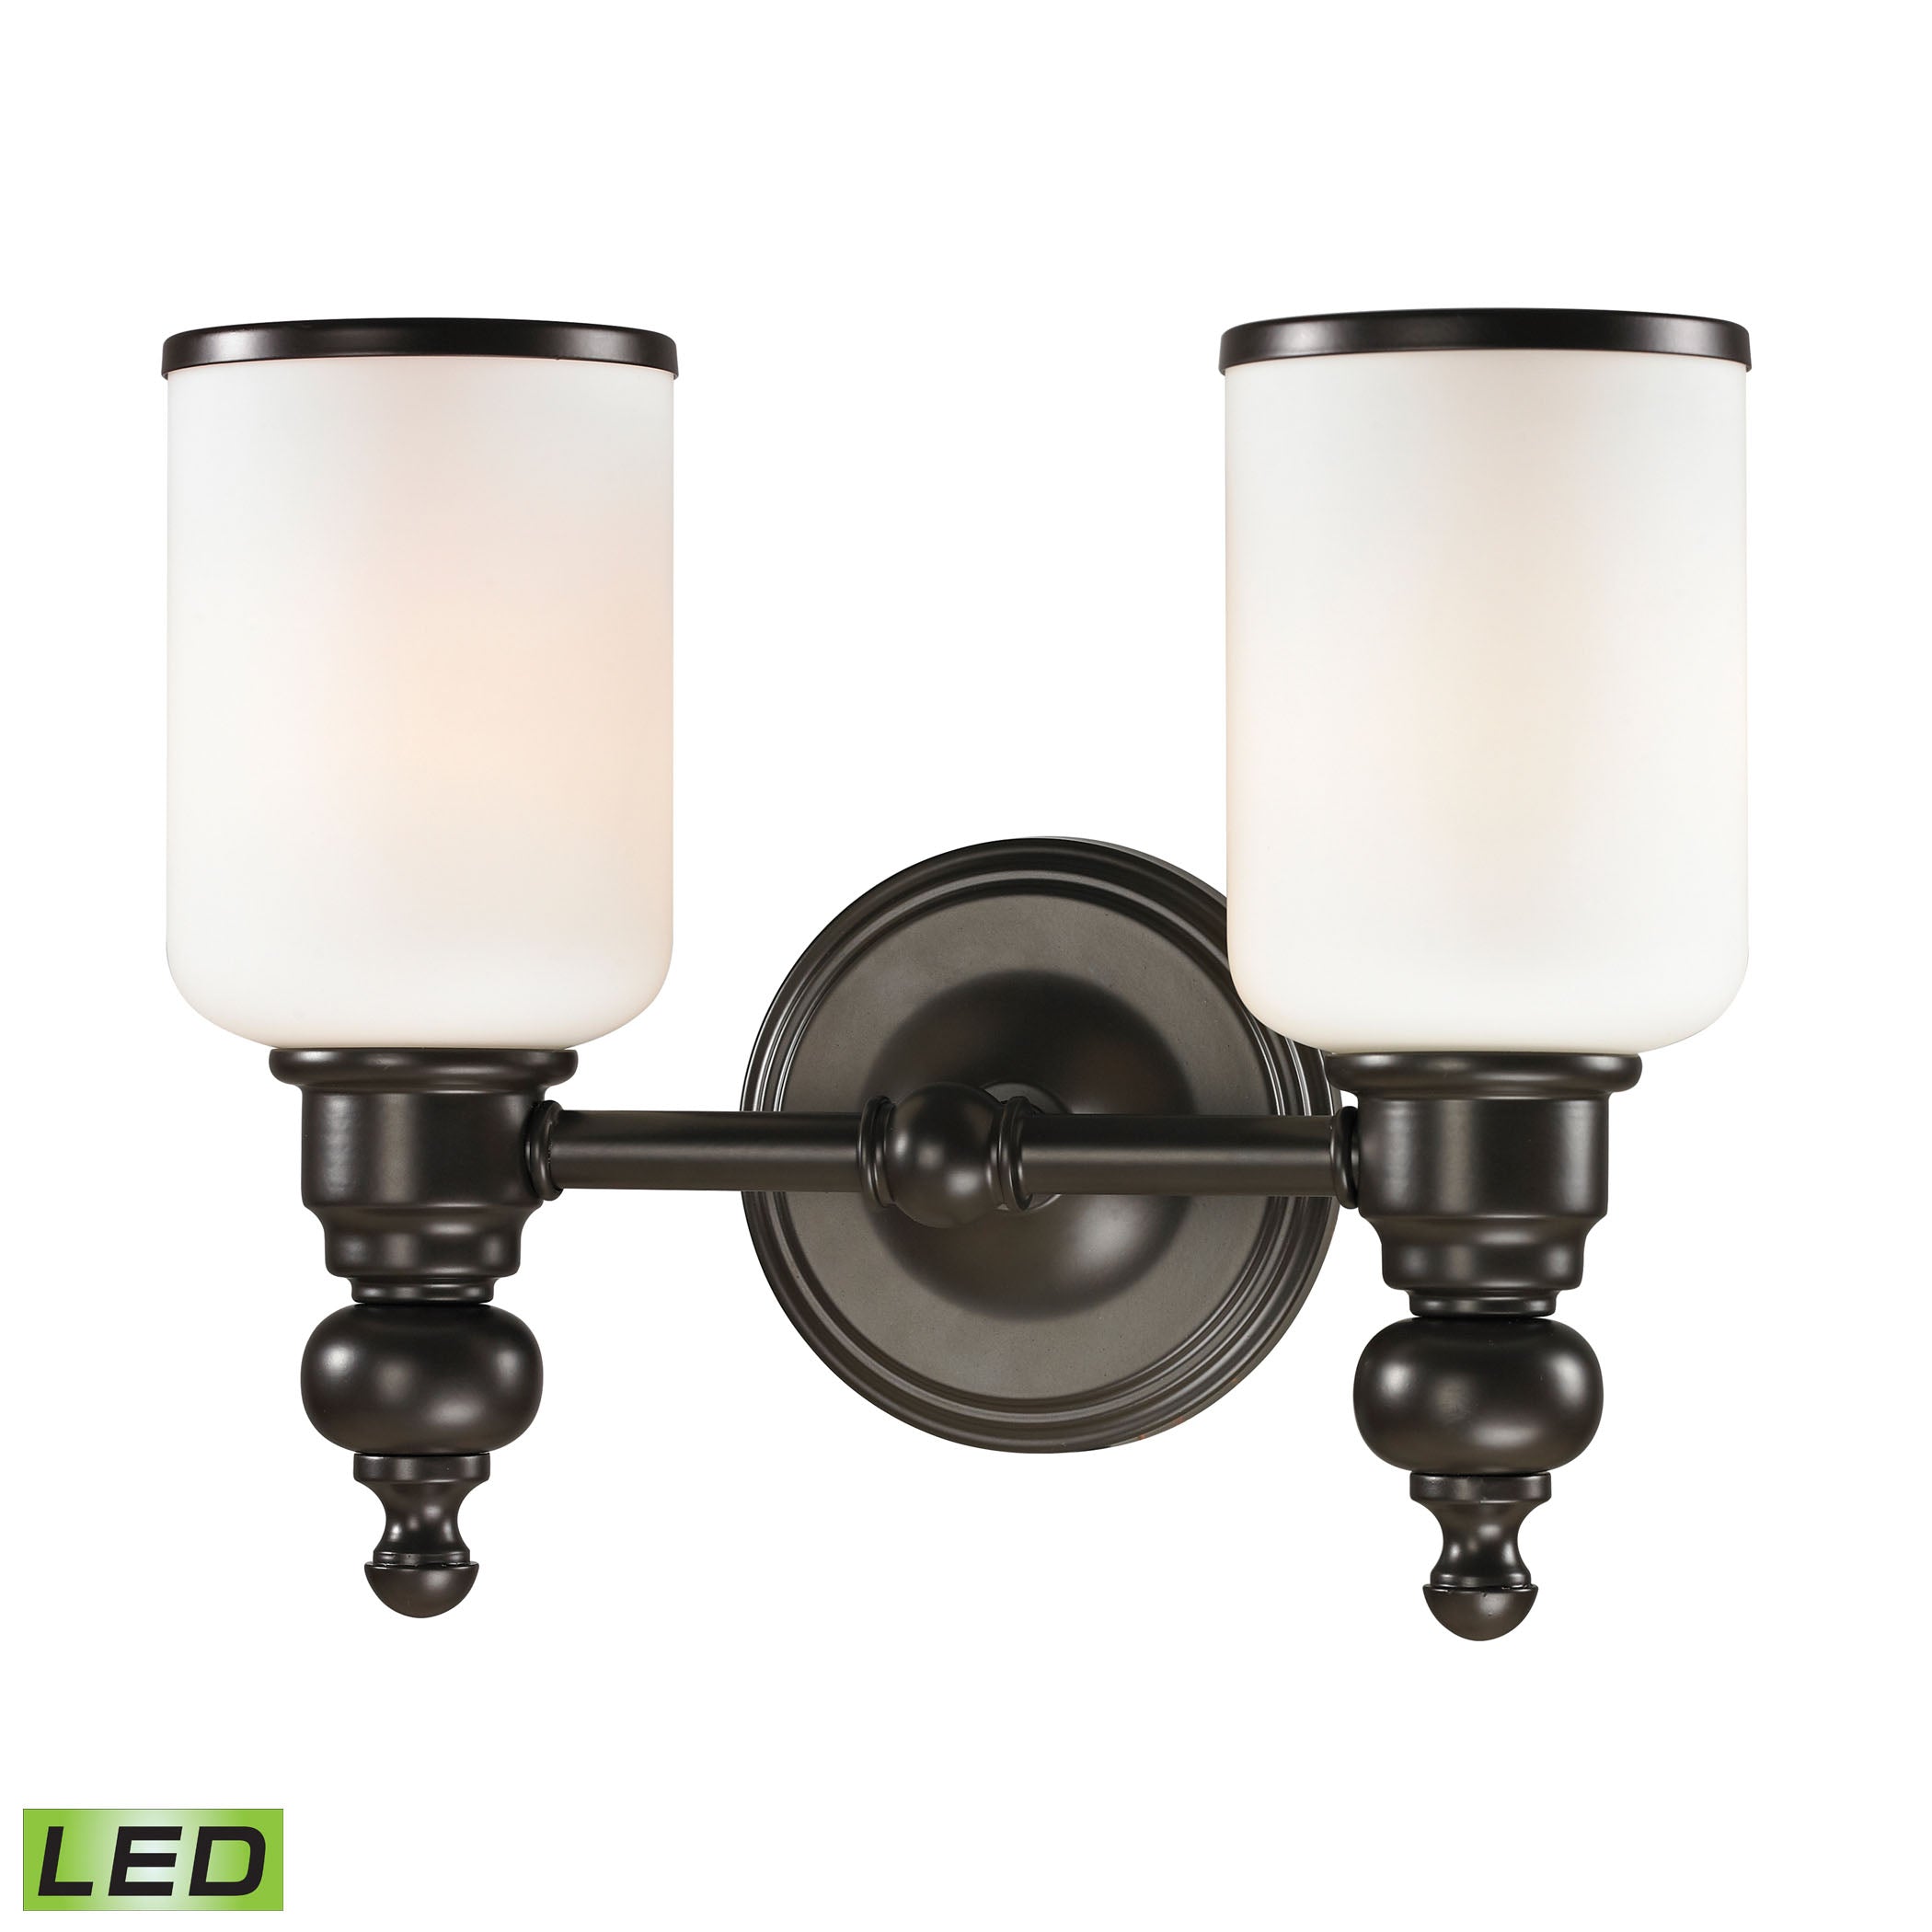 ELK Lighting 11591/2-LED Bristol 2-Light Vanity Lamp in Oil Rubbed Bronze with Opal White Blown Glass - Includes LED Bulbs